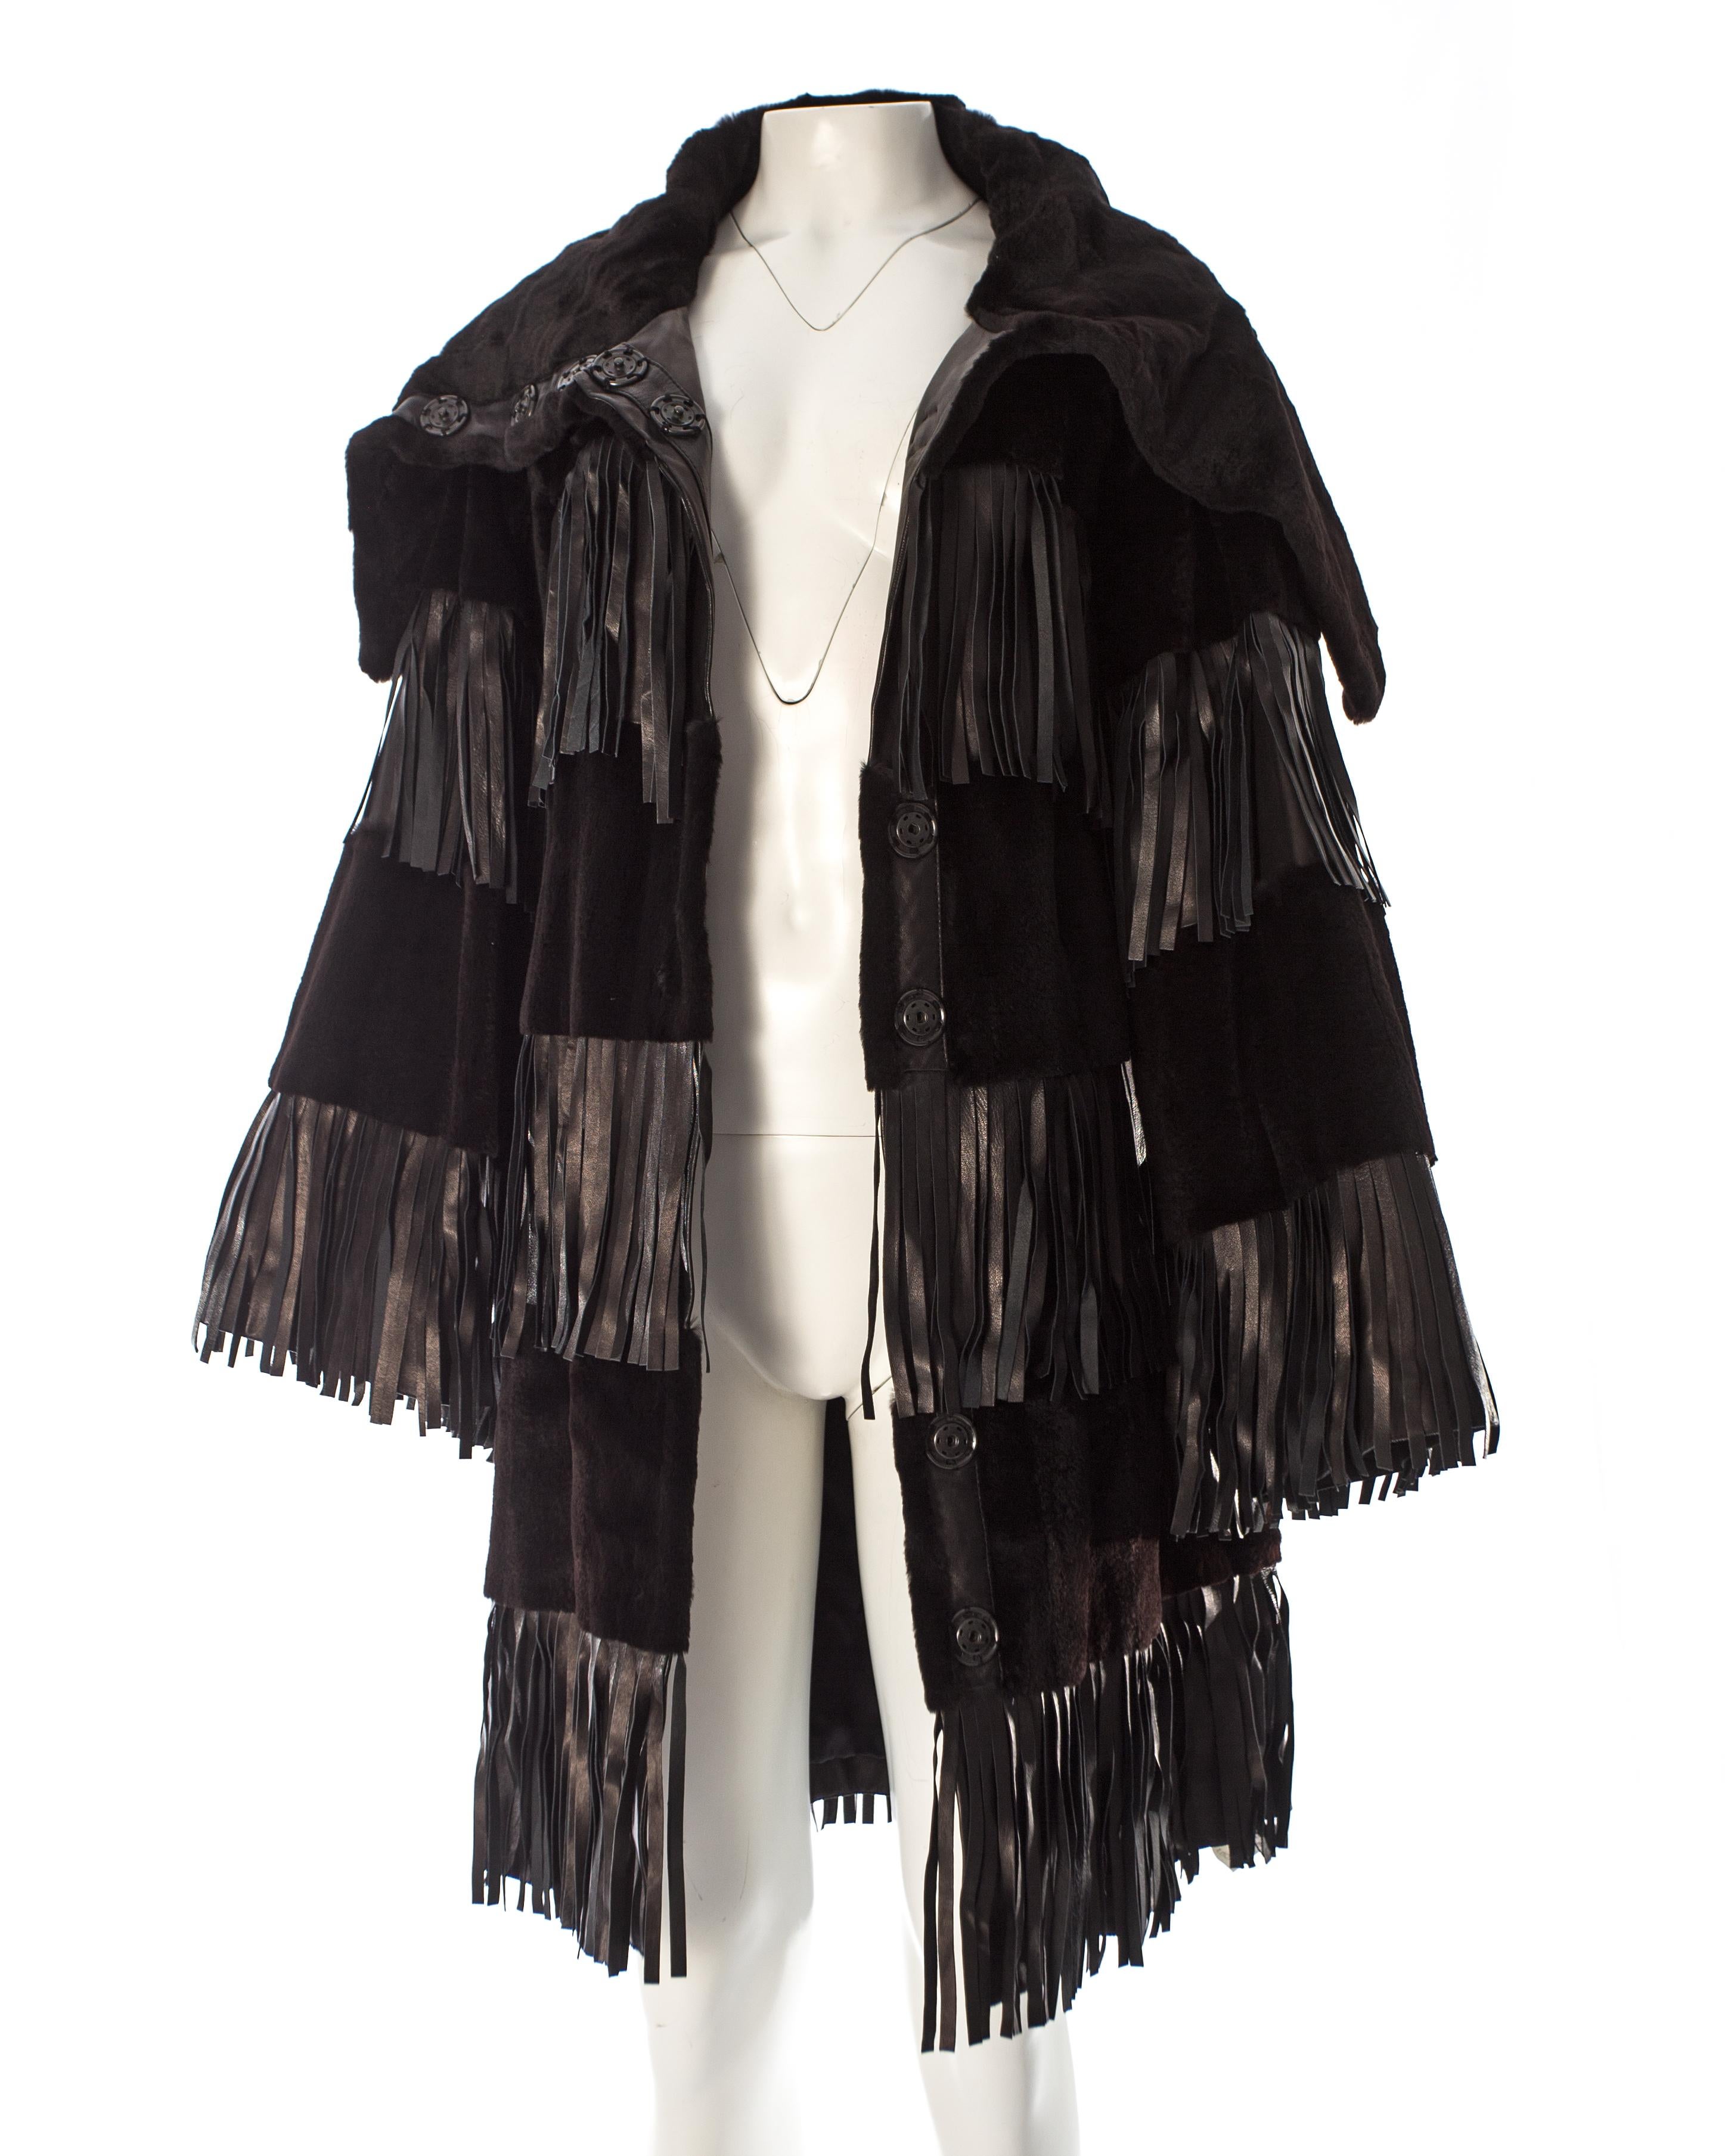 Dolce & Gabbana black sheared weasel fur coat with leather fringing, A / W 2003 In Excellent Condition For Sale In London, GB